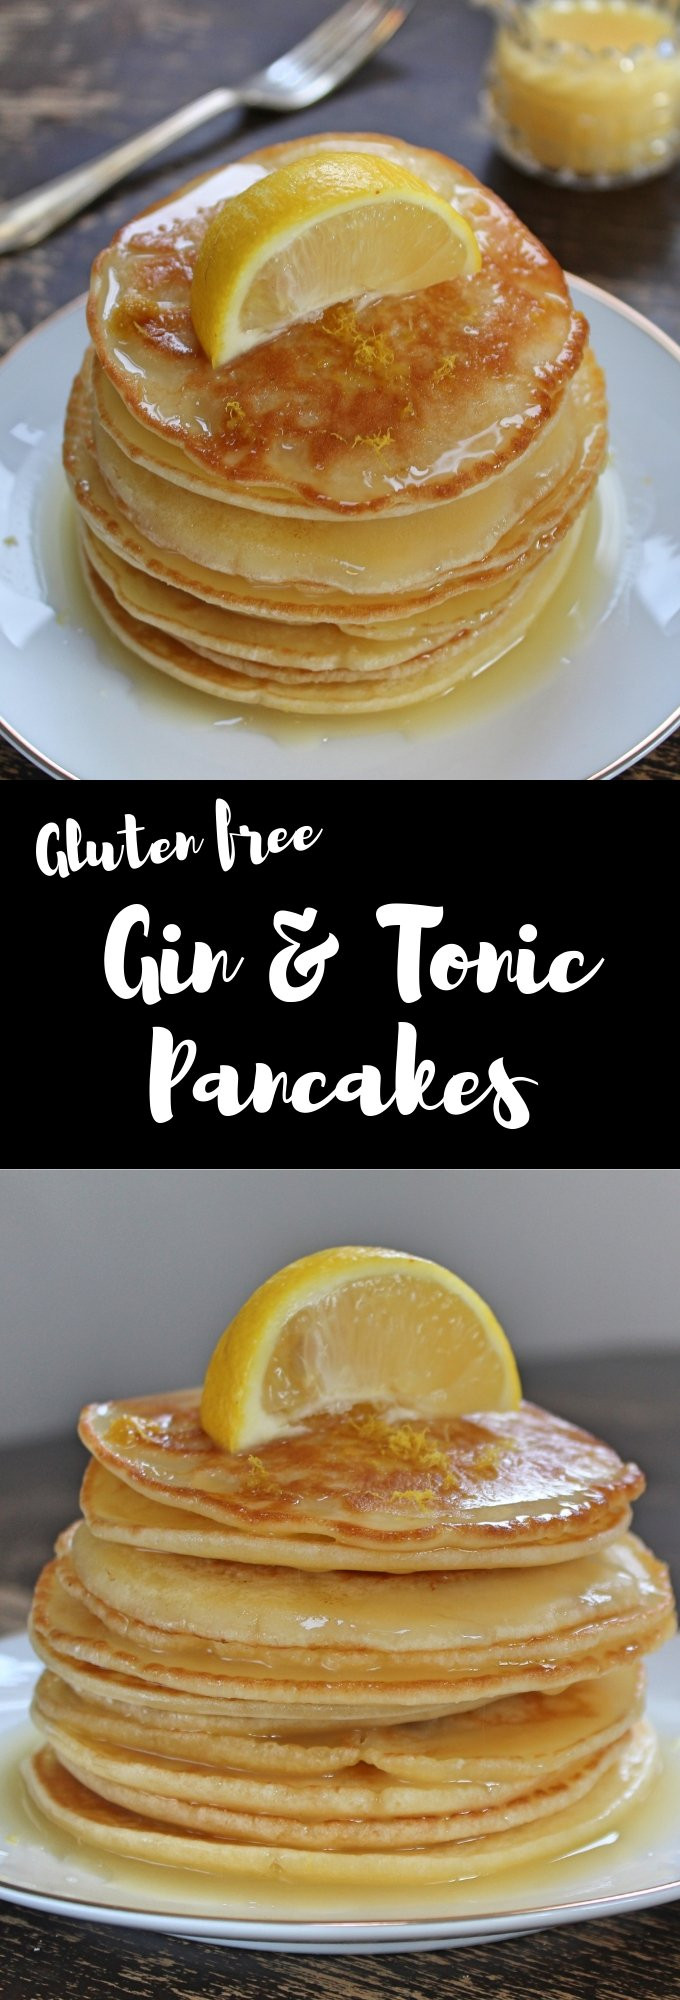 Gluten And Dairy Free Pancakes
 Gluten free gin and tonic pancakes dairy free too The